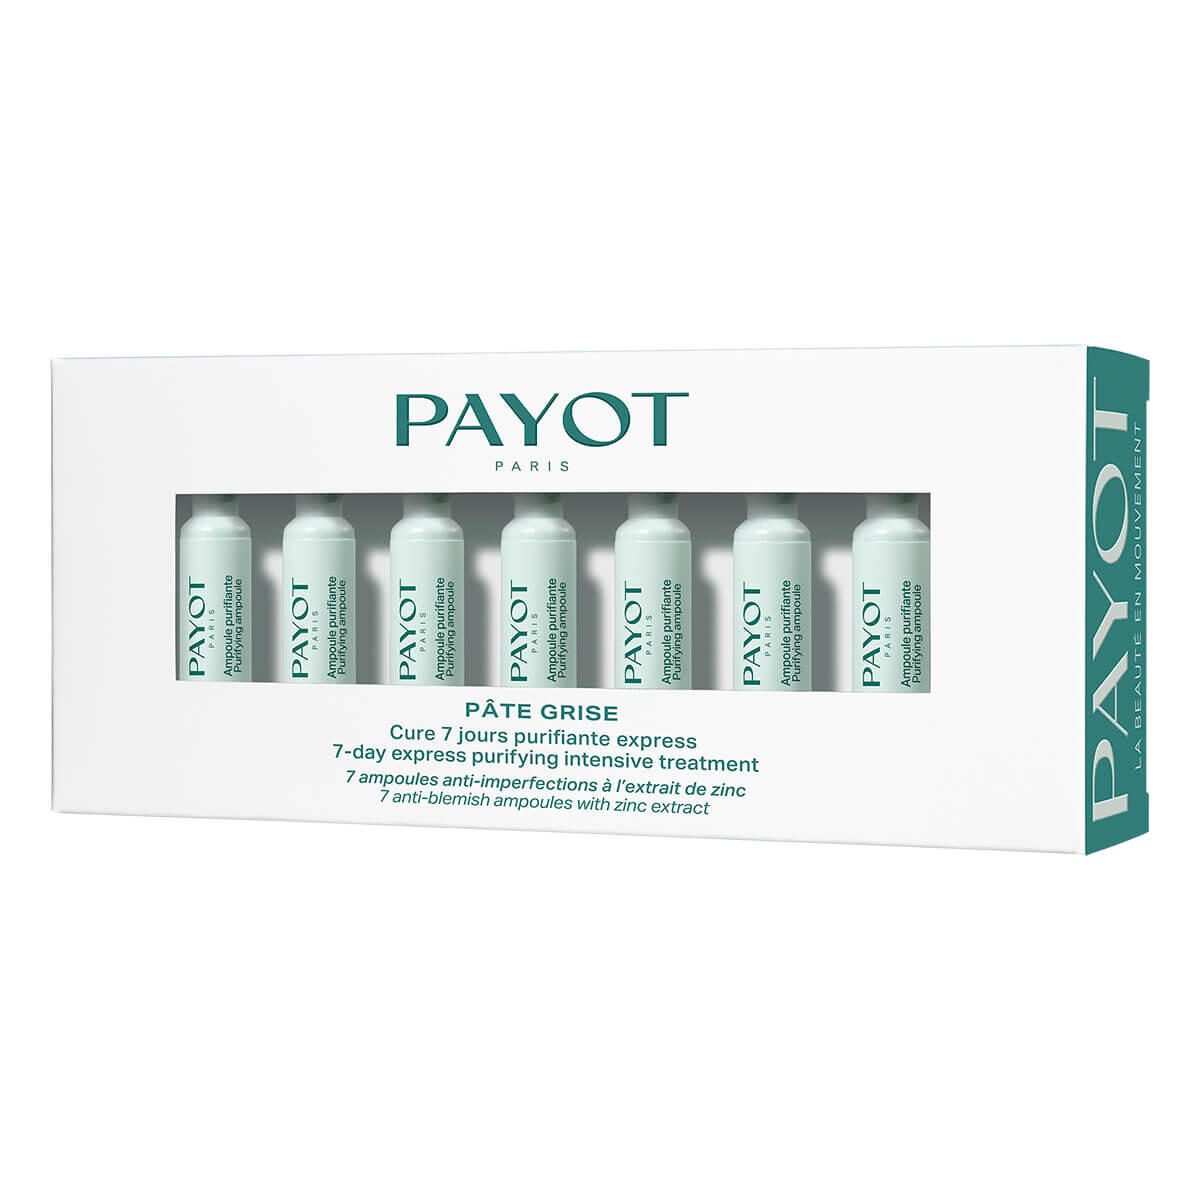 Se Payot PÃ¢te Grise 7-day Express Purifying Intensive Treatment kur, 7 x 1,5 ml. hos Proshave